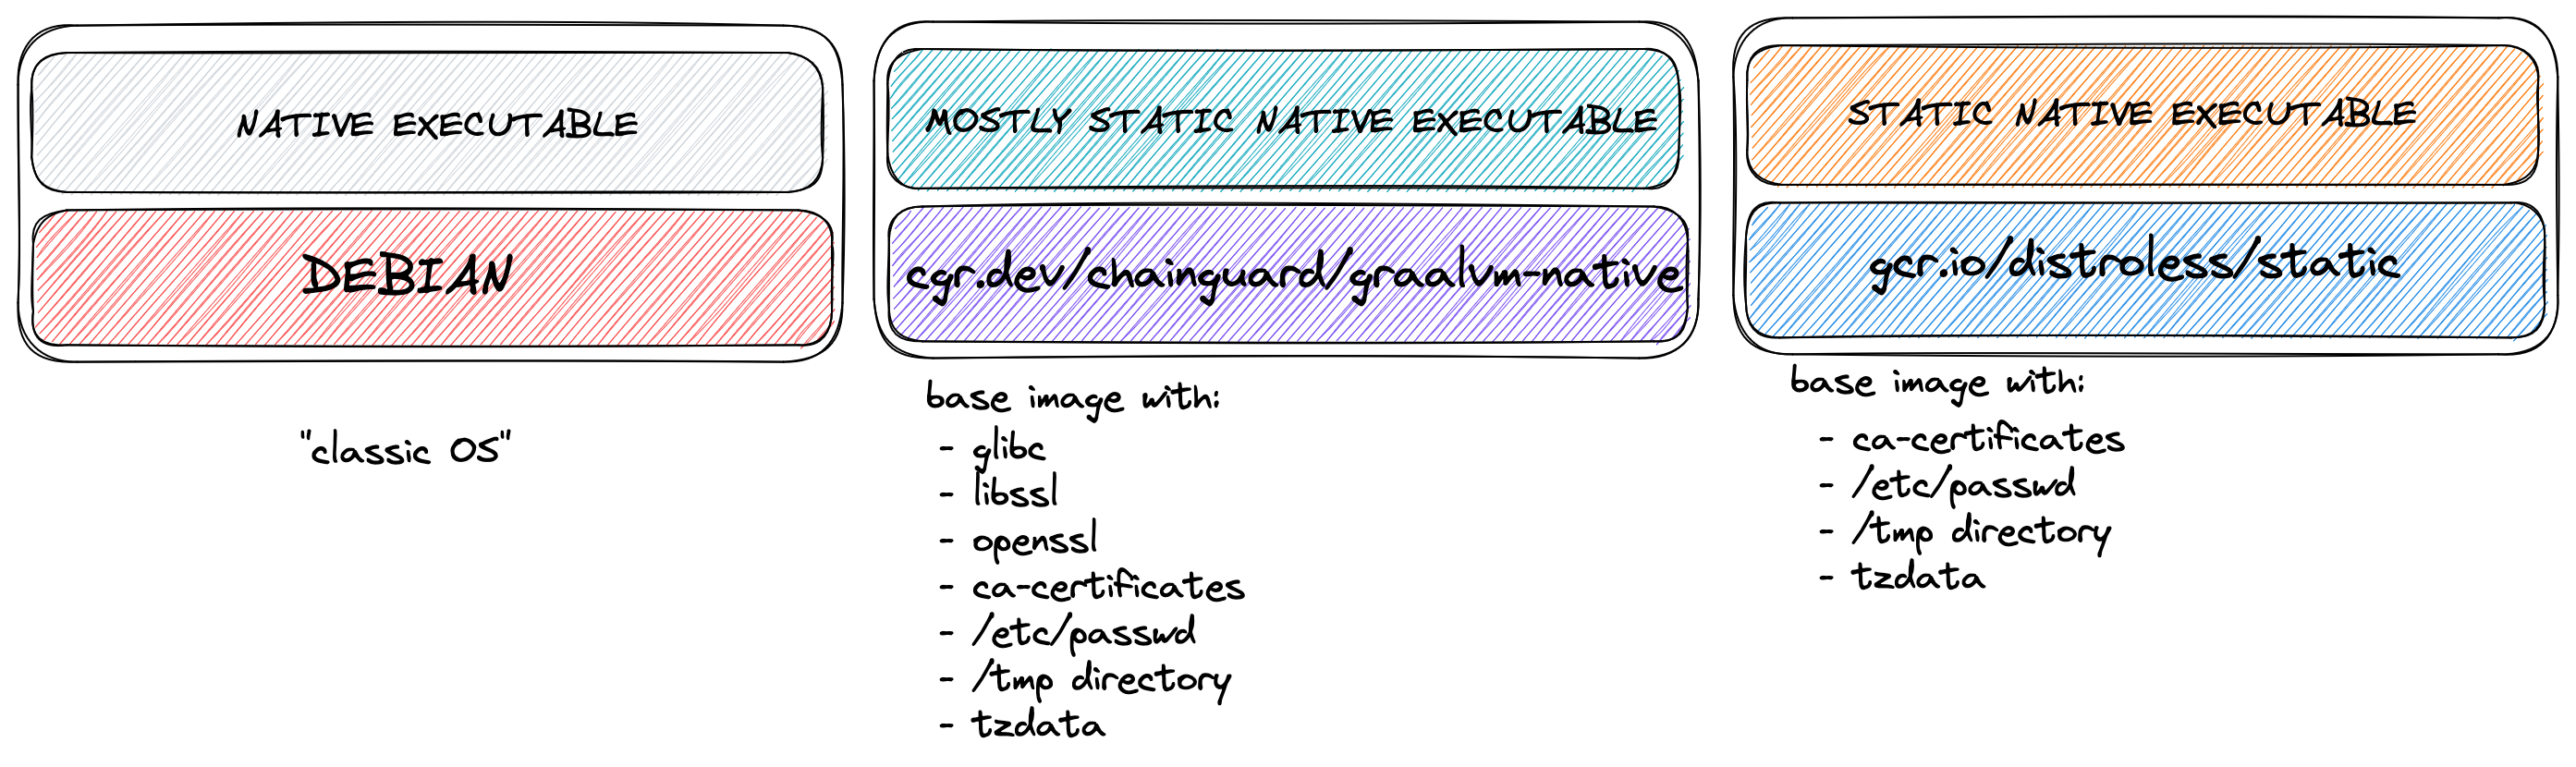 native_executables.png